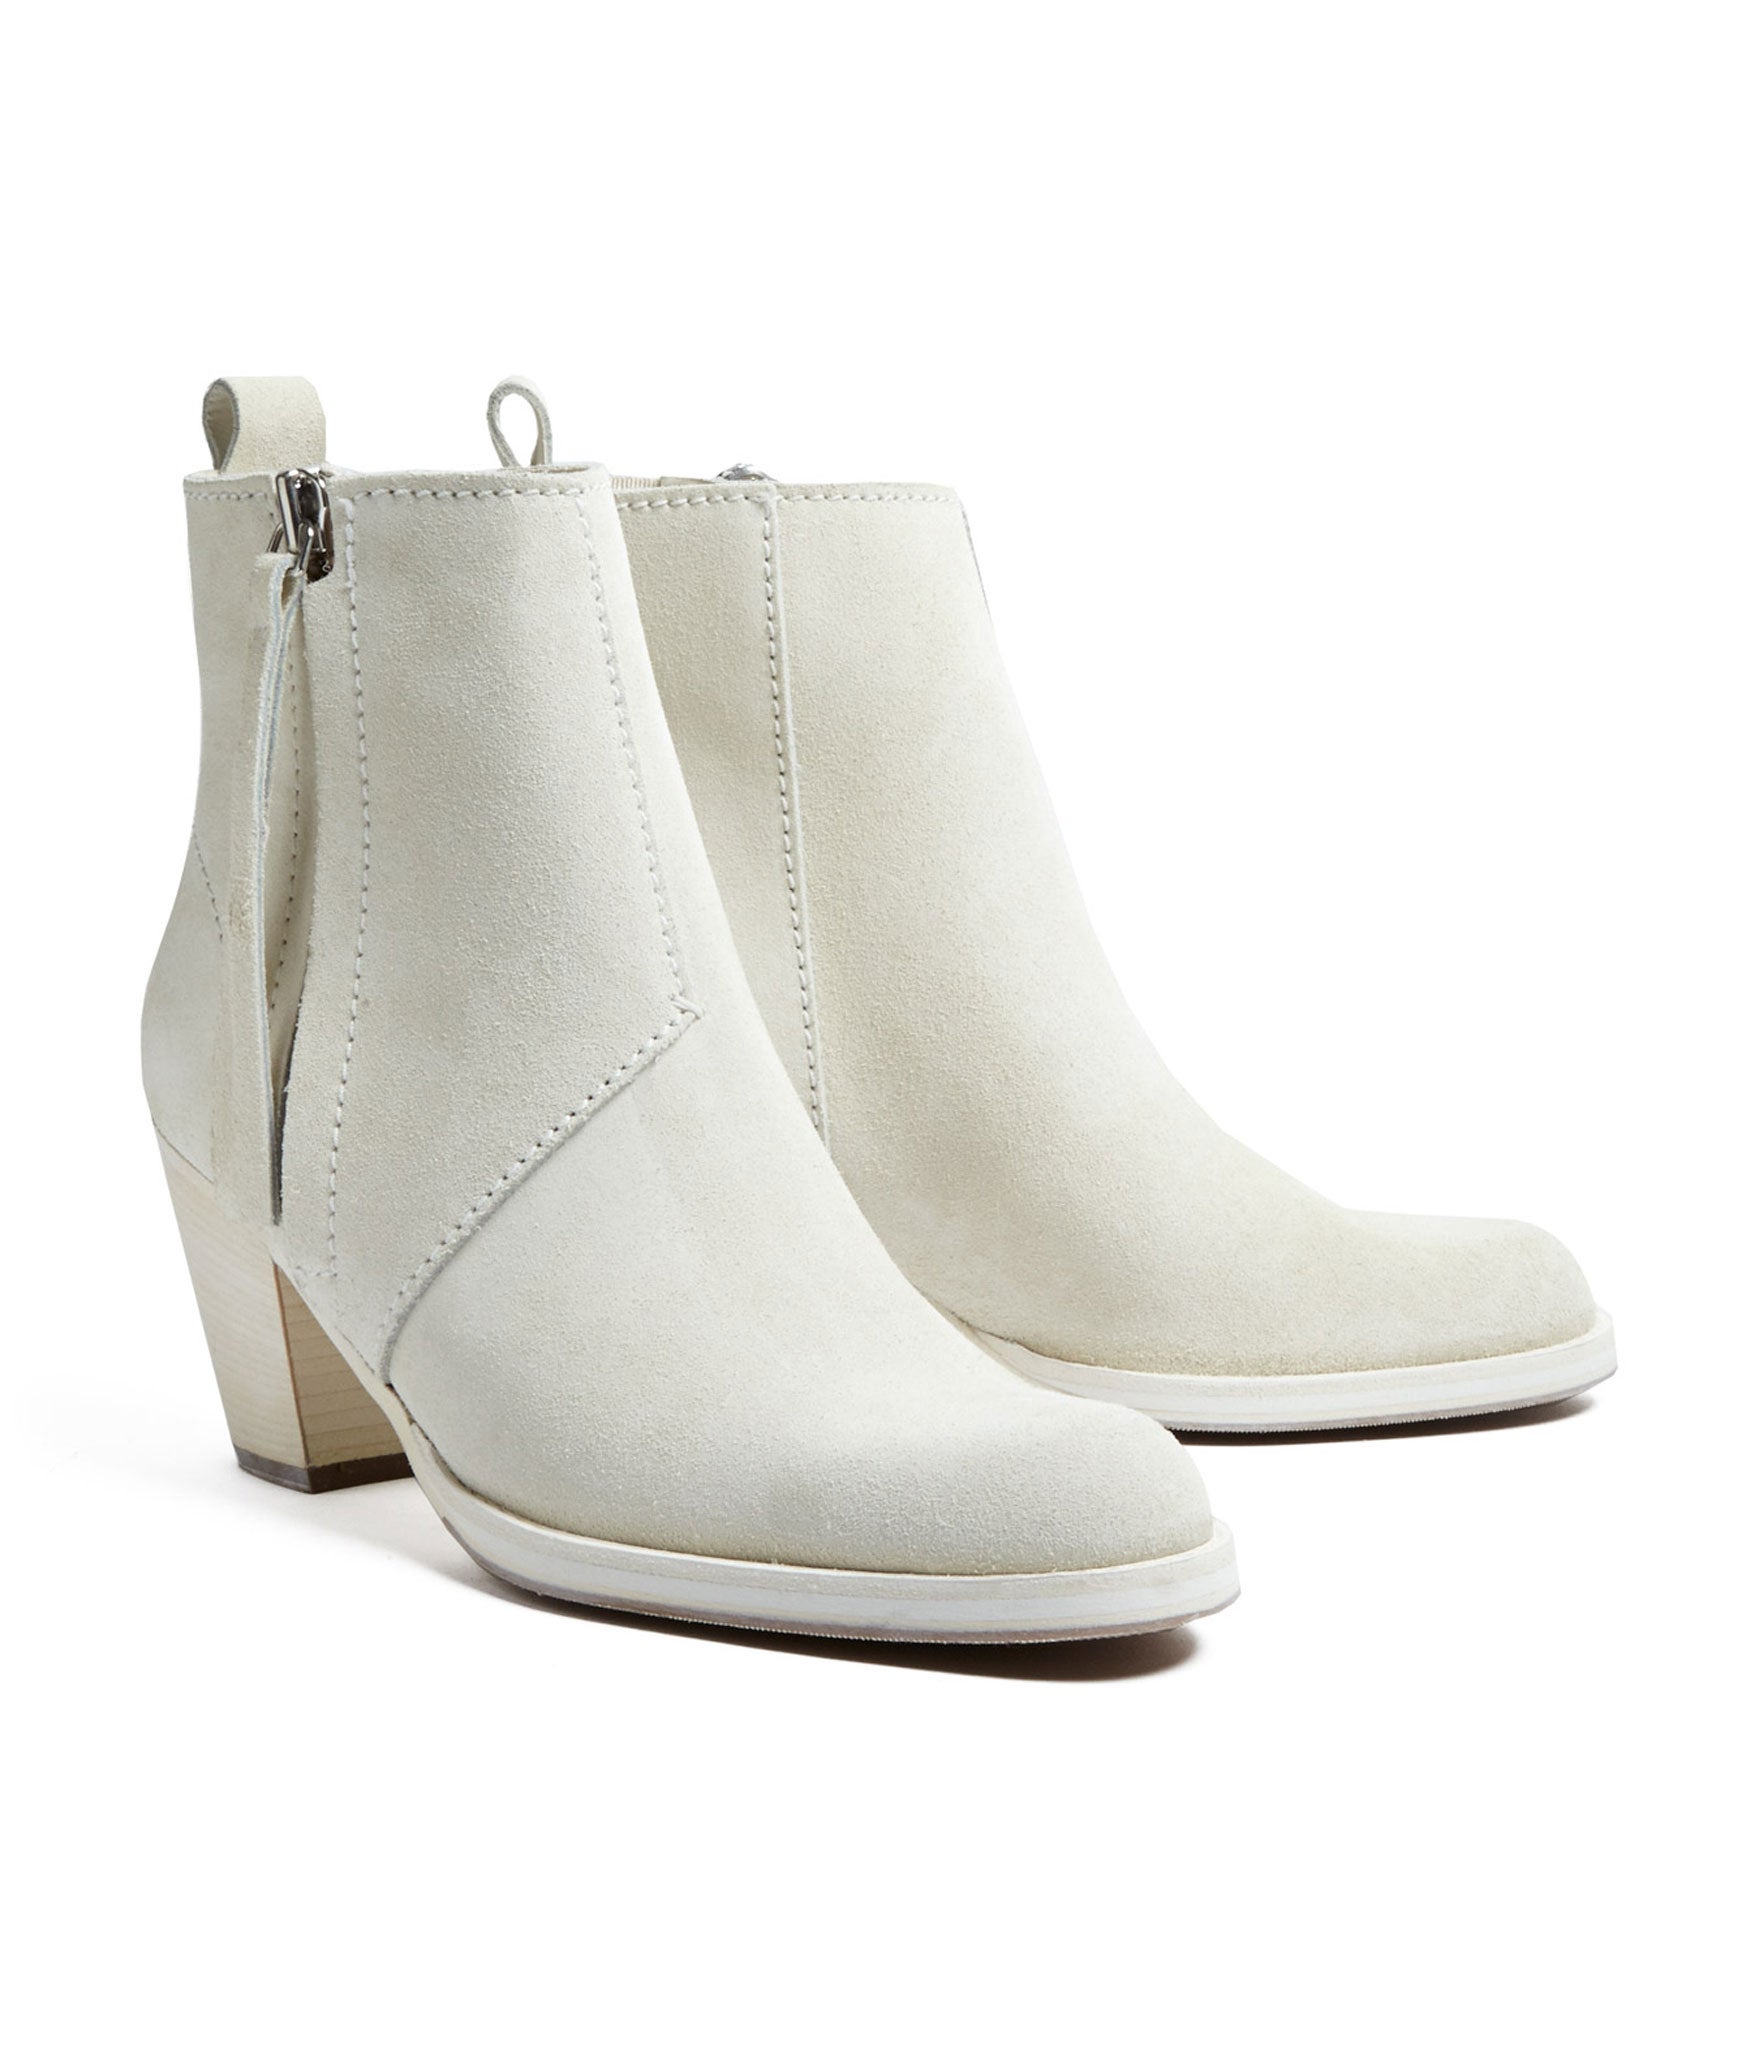 How to get the look: White boots | The 